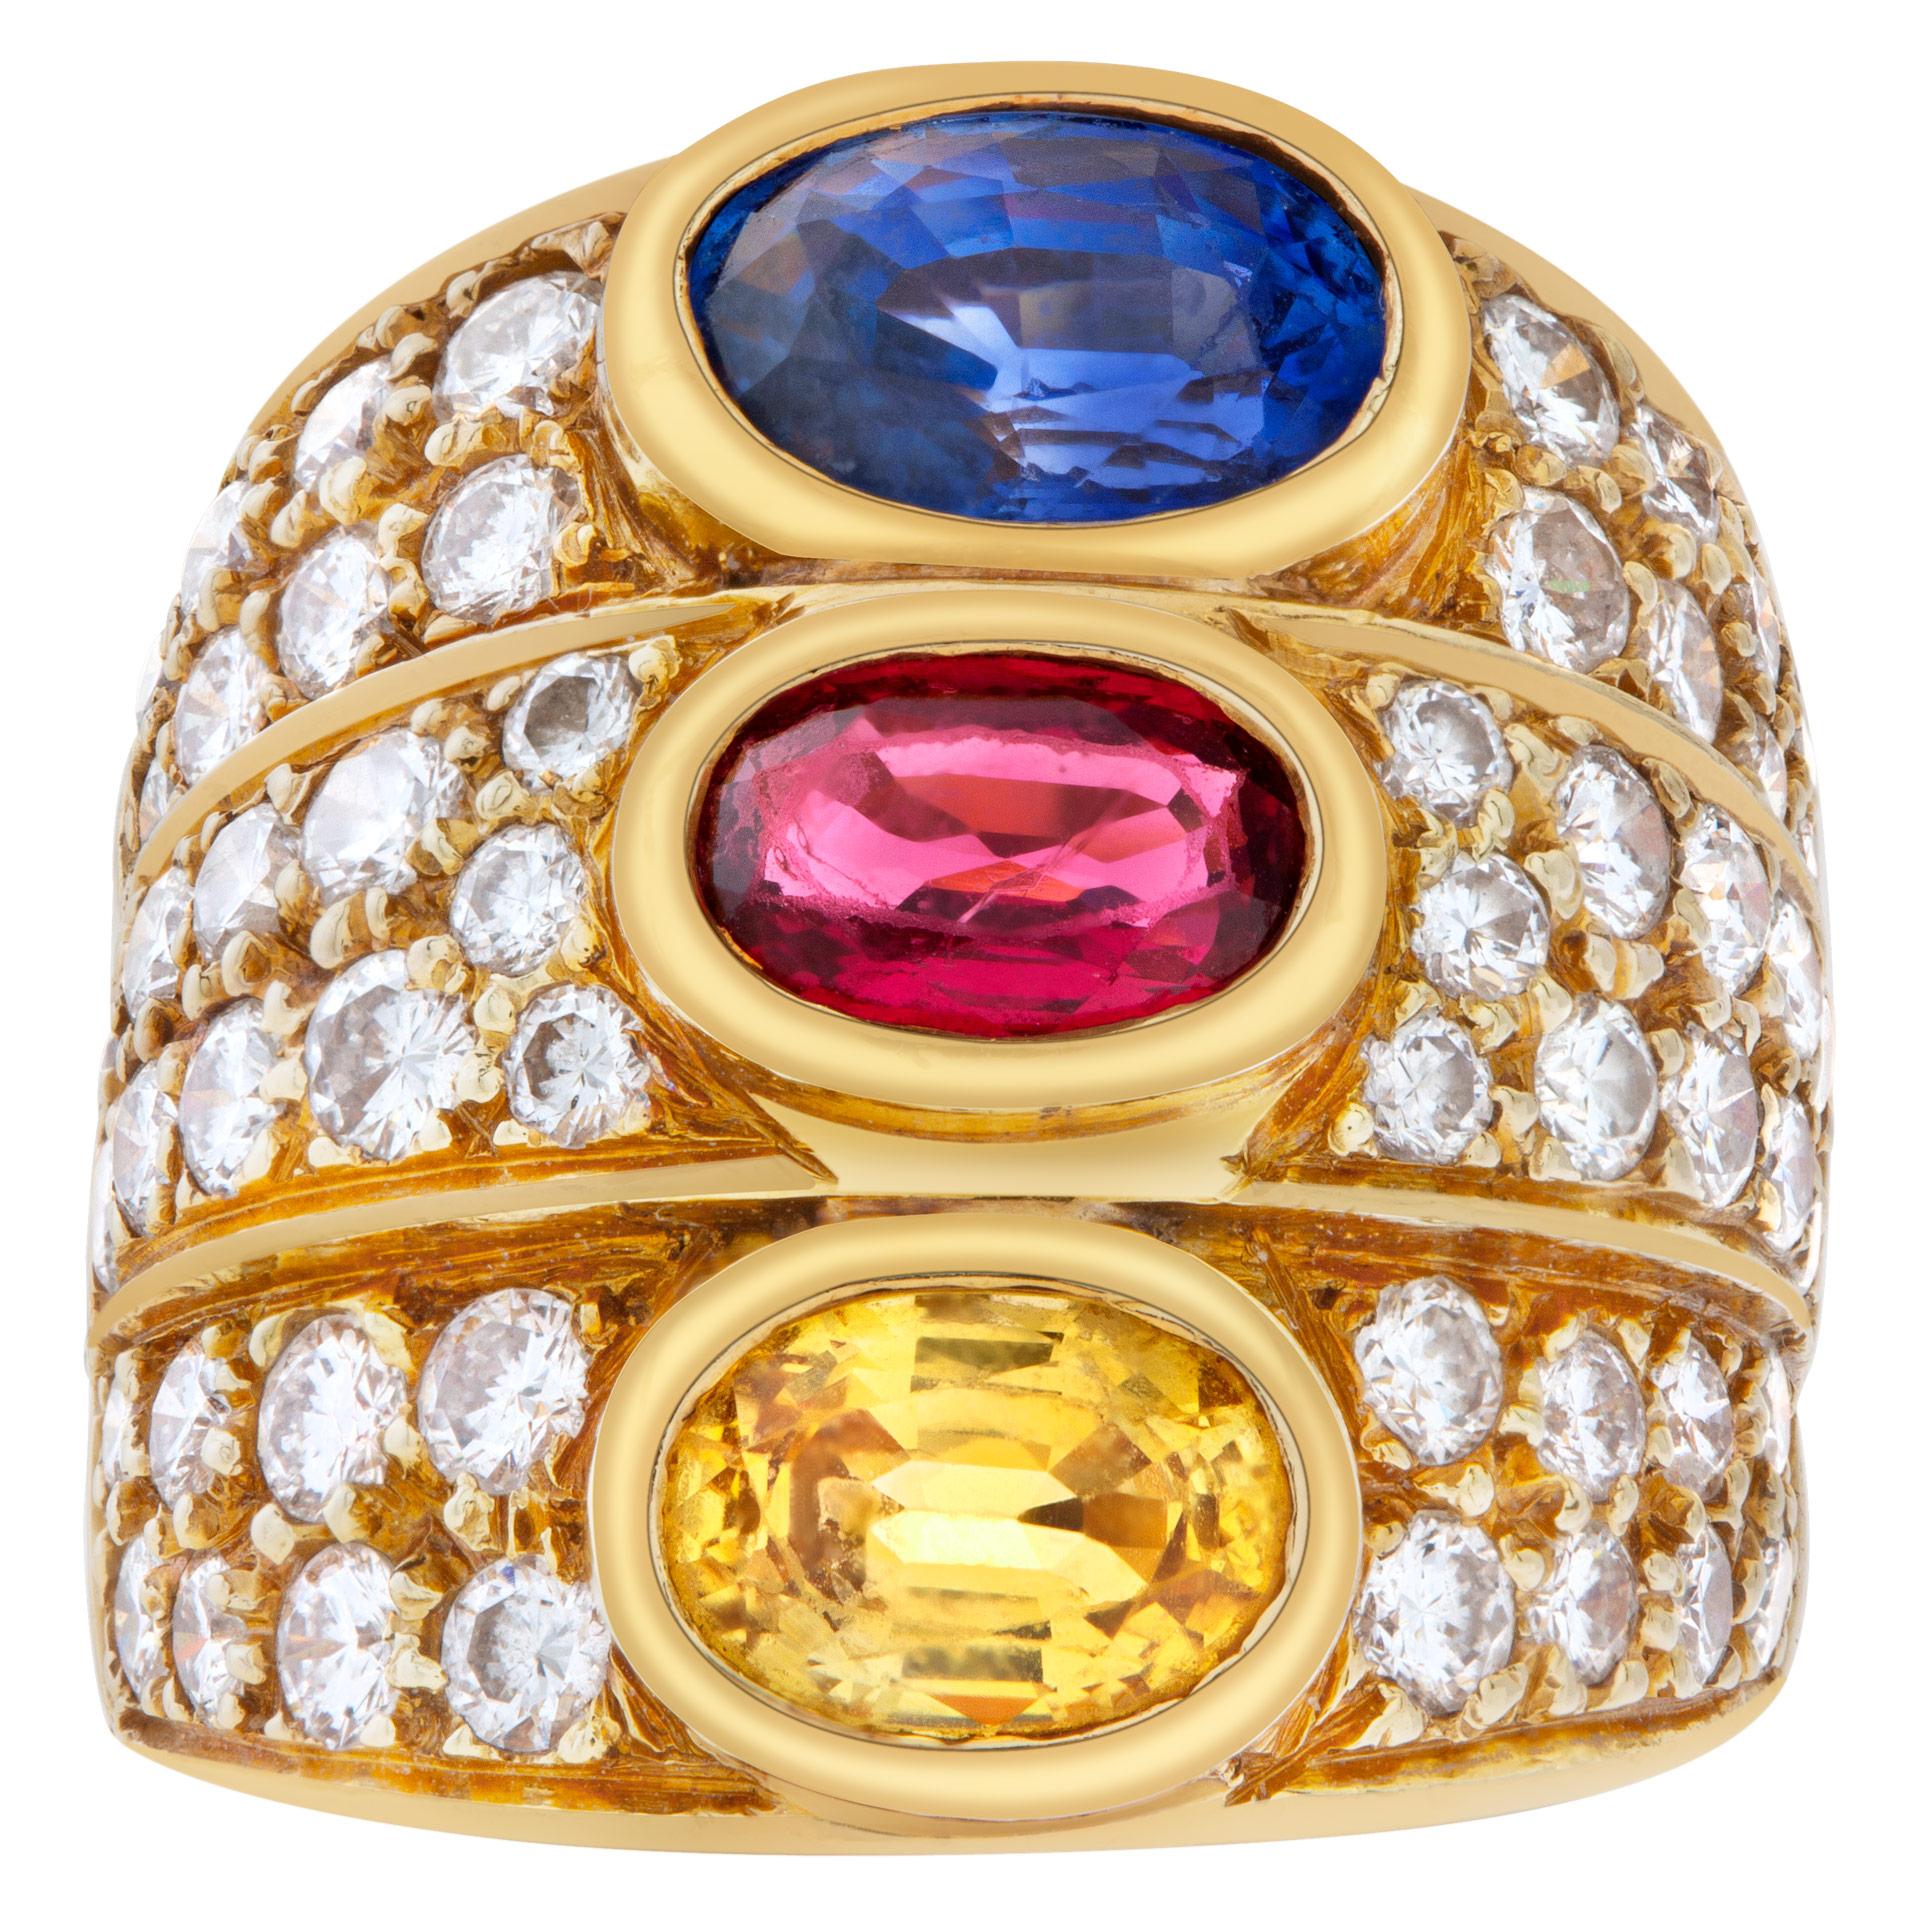 Blue sapphire, ruby and citrine ring with over 2 carats round brilliant cut diamonds, estimate: G-H color, VS clarity, set in 18k gold. Size 6.This Diamond ring is currently size 6 and some items can be sized up or down, please ask! It weighs 10